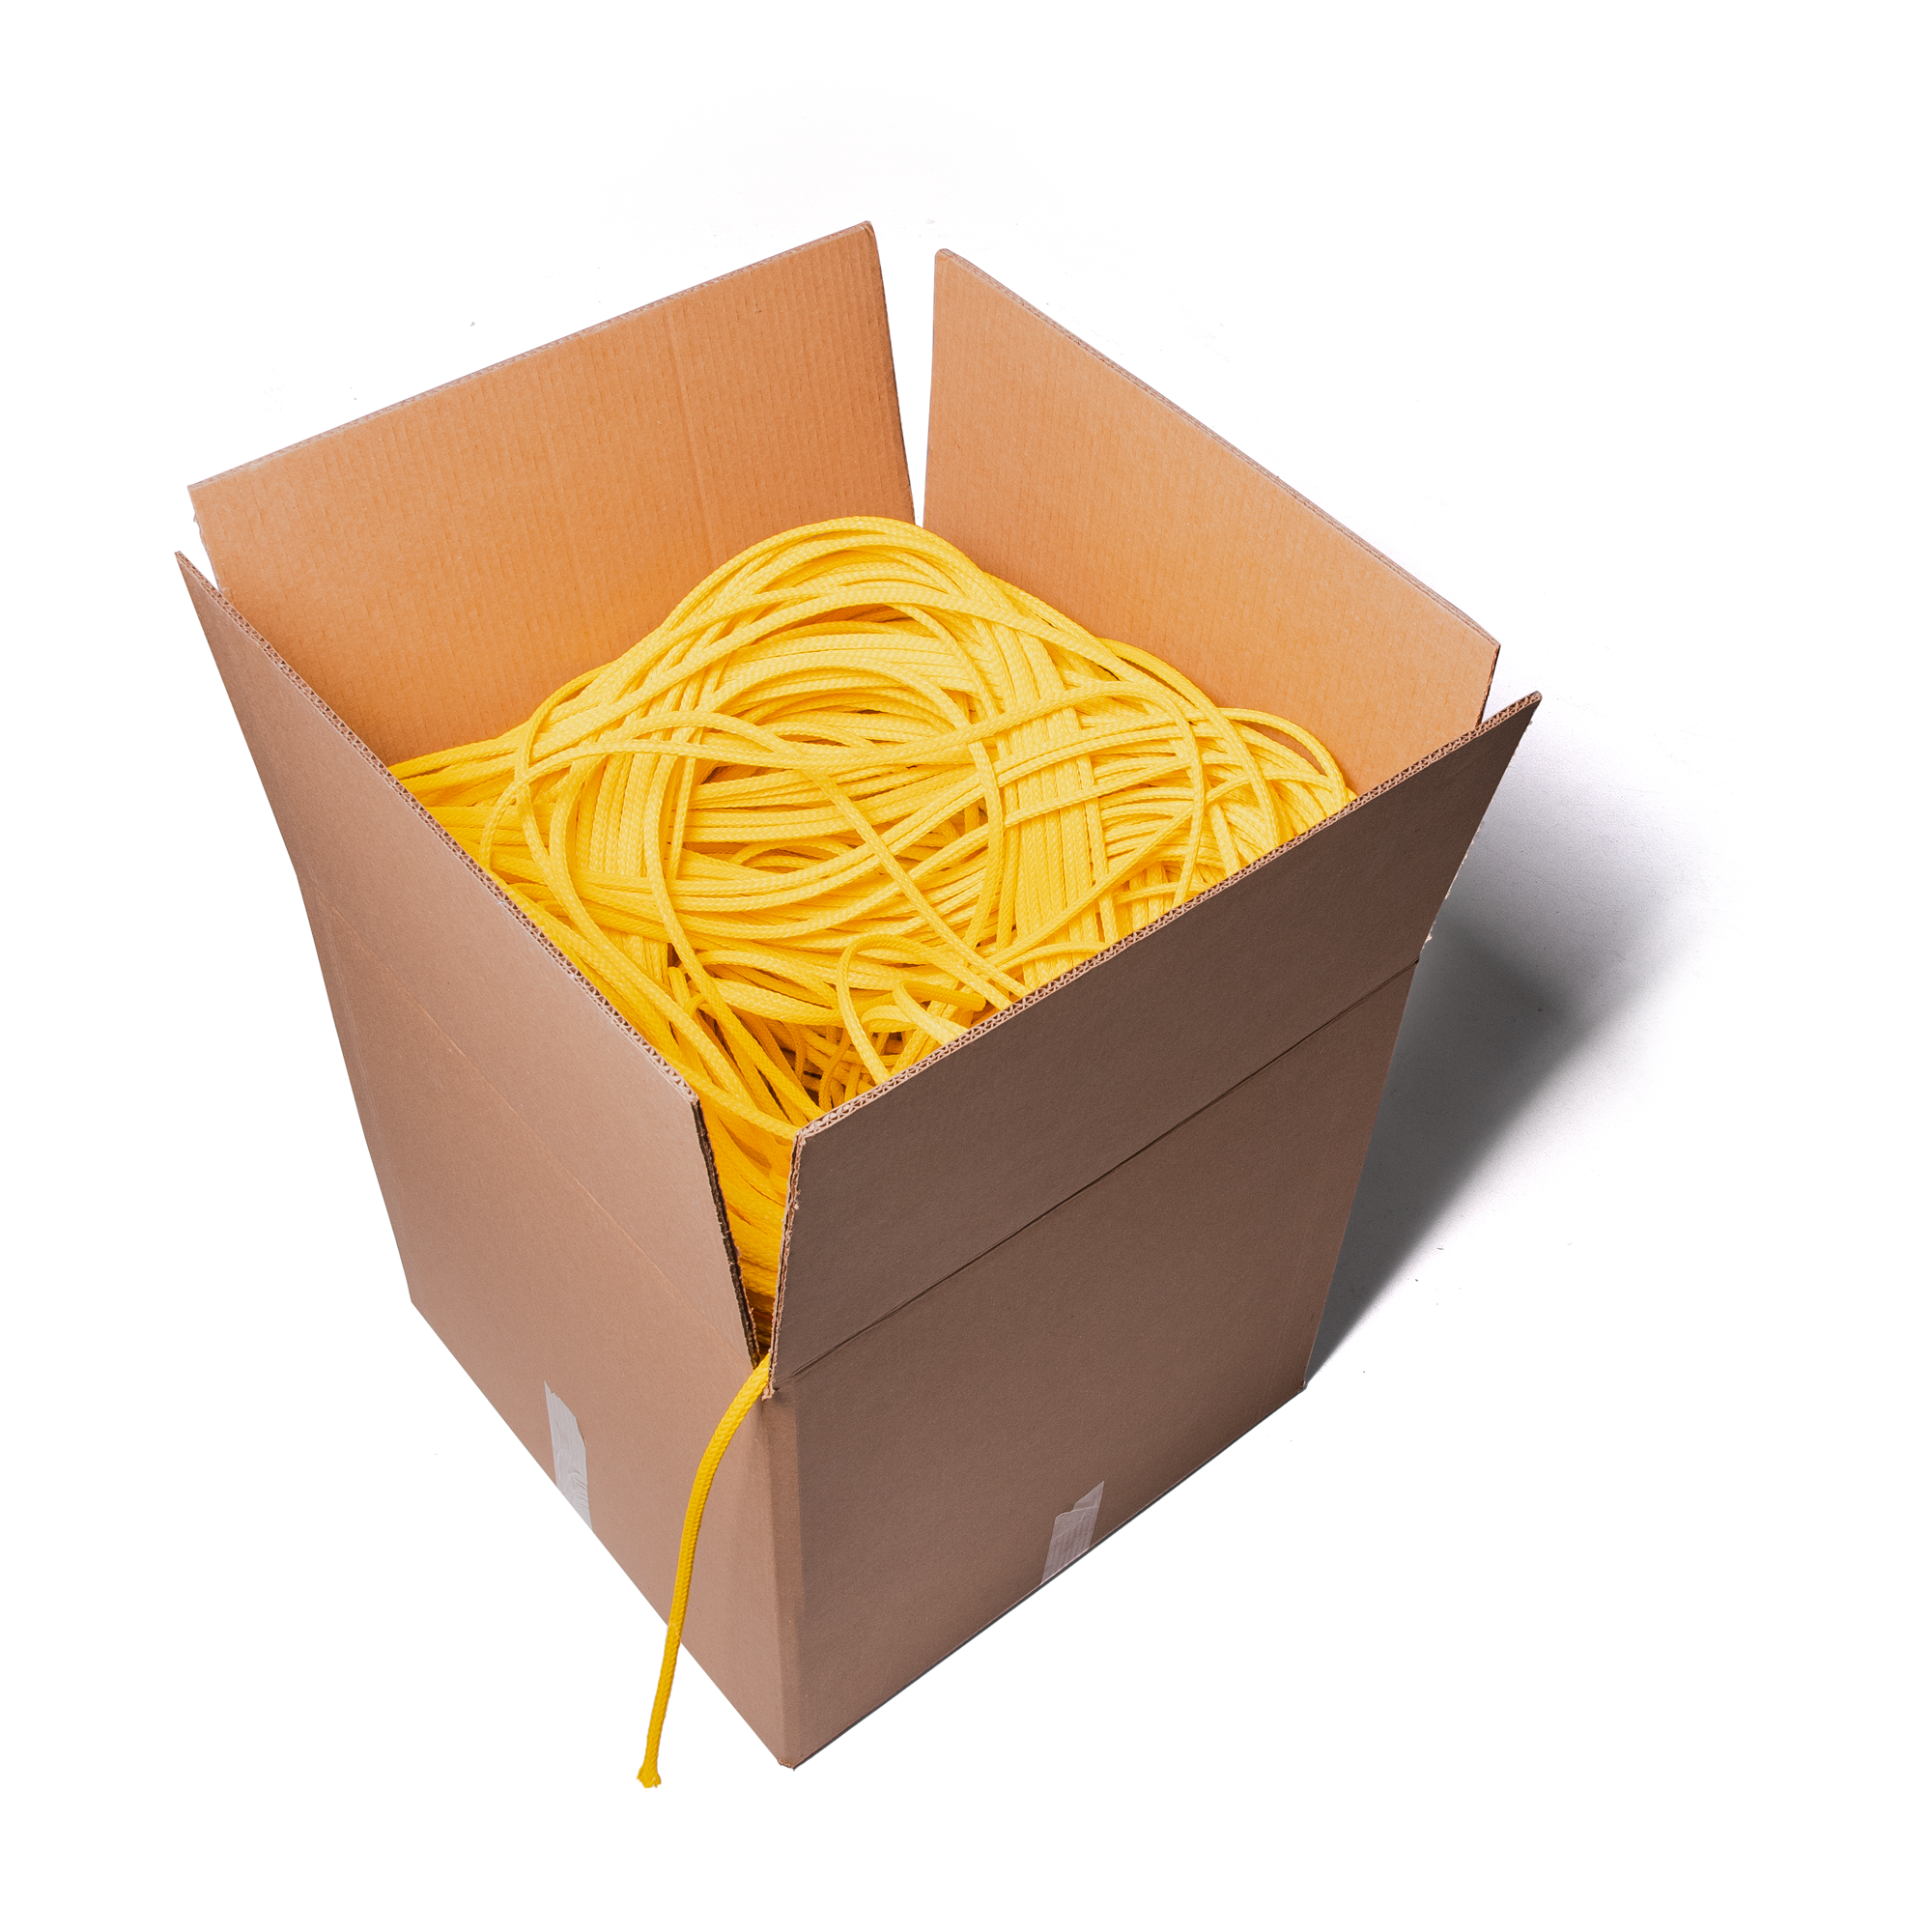 8MM (HDPE) Poly-Ethylene Bulk Rope - Solid Yellow Sold by the Box